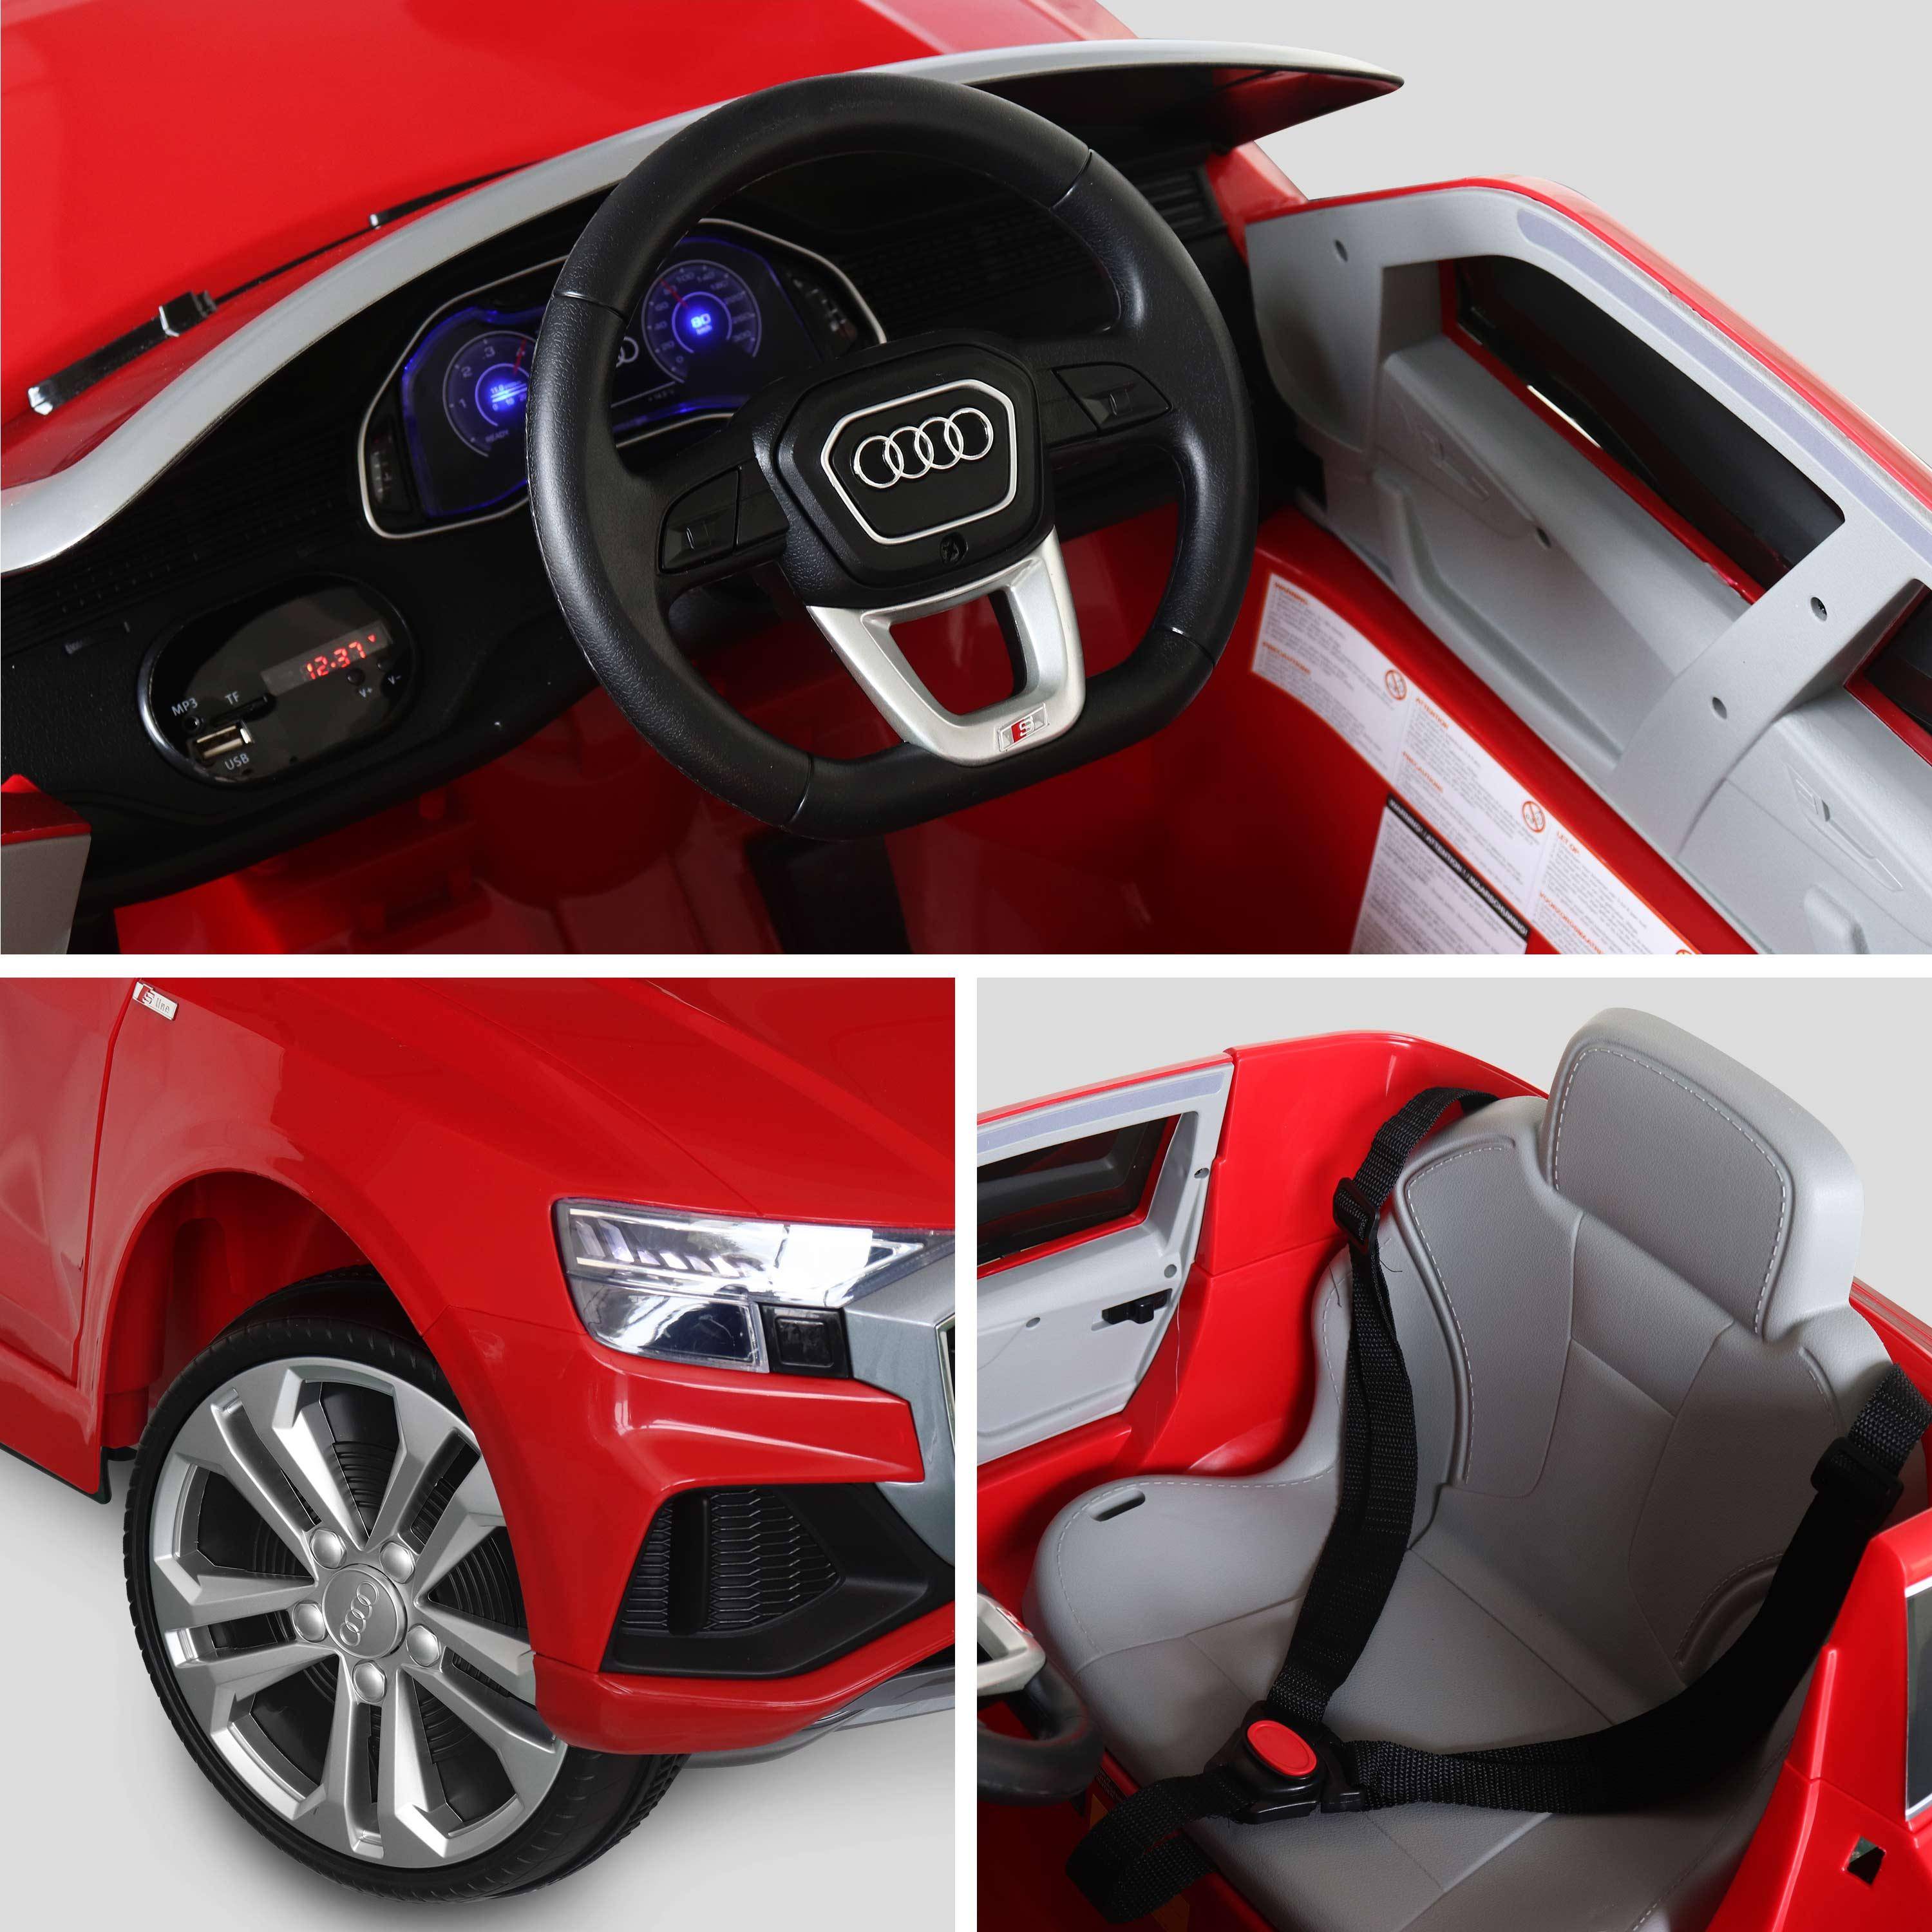 Children's electric car 12V, 1 seat with car radio and remote control - AUDI Q8 - Red,sweeek,Photo4